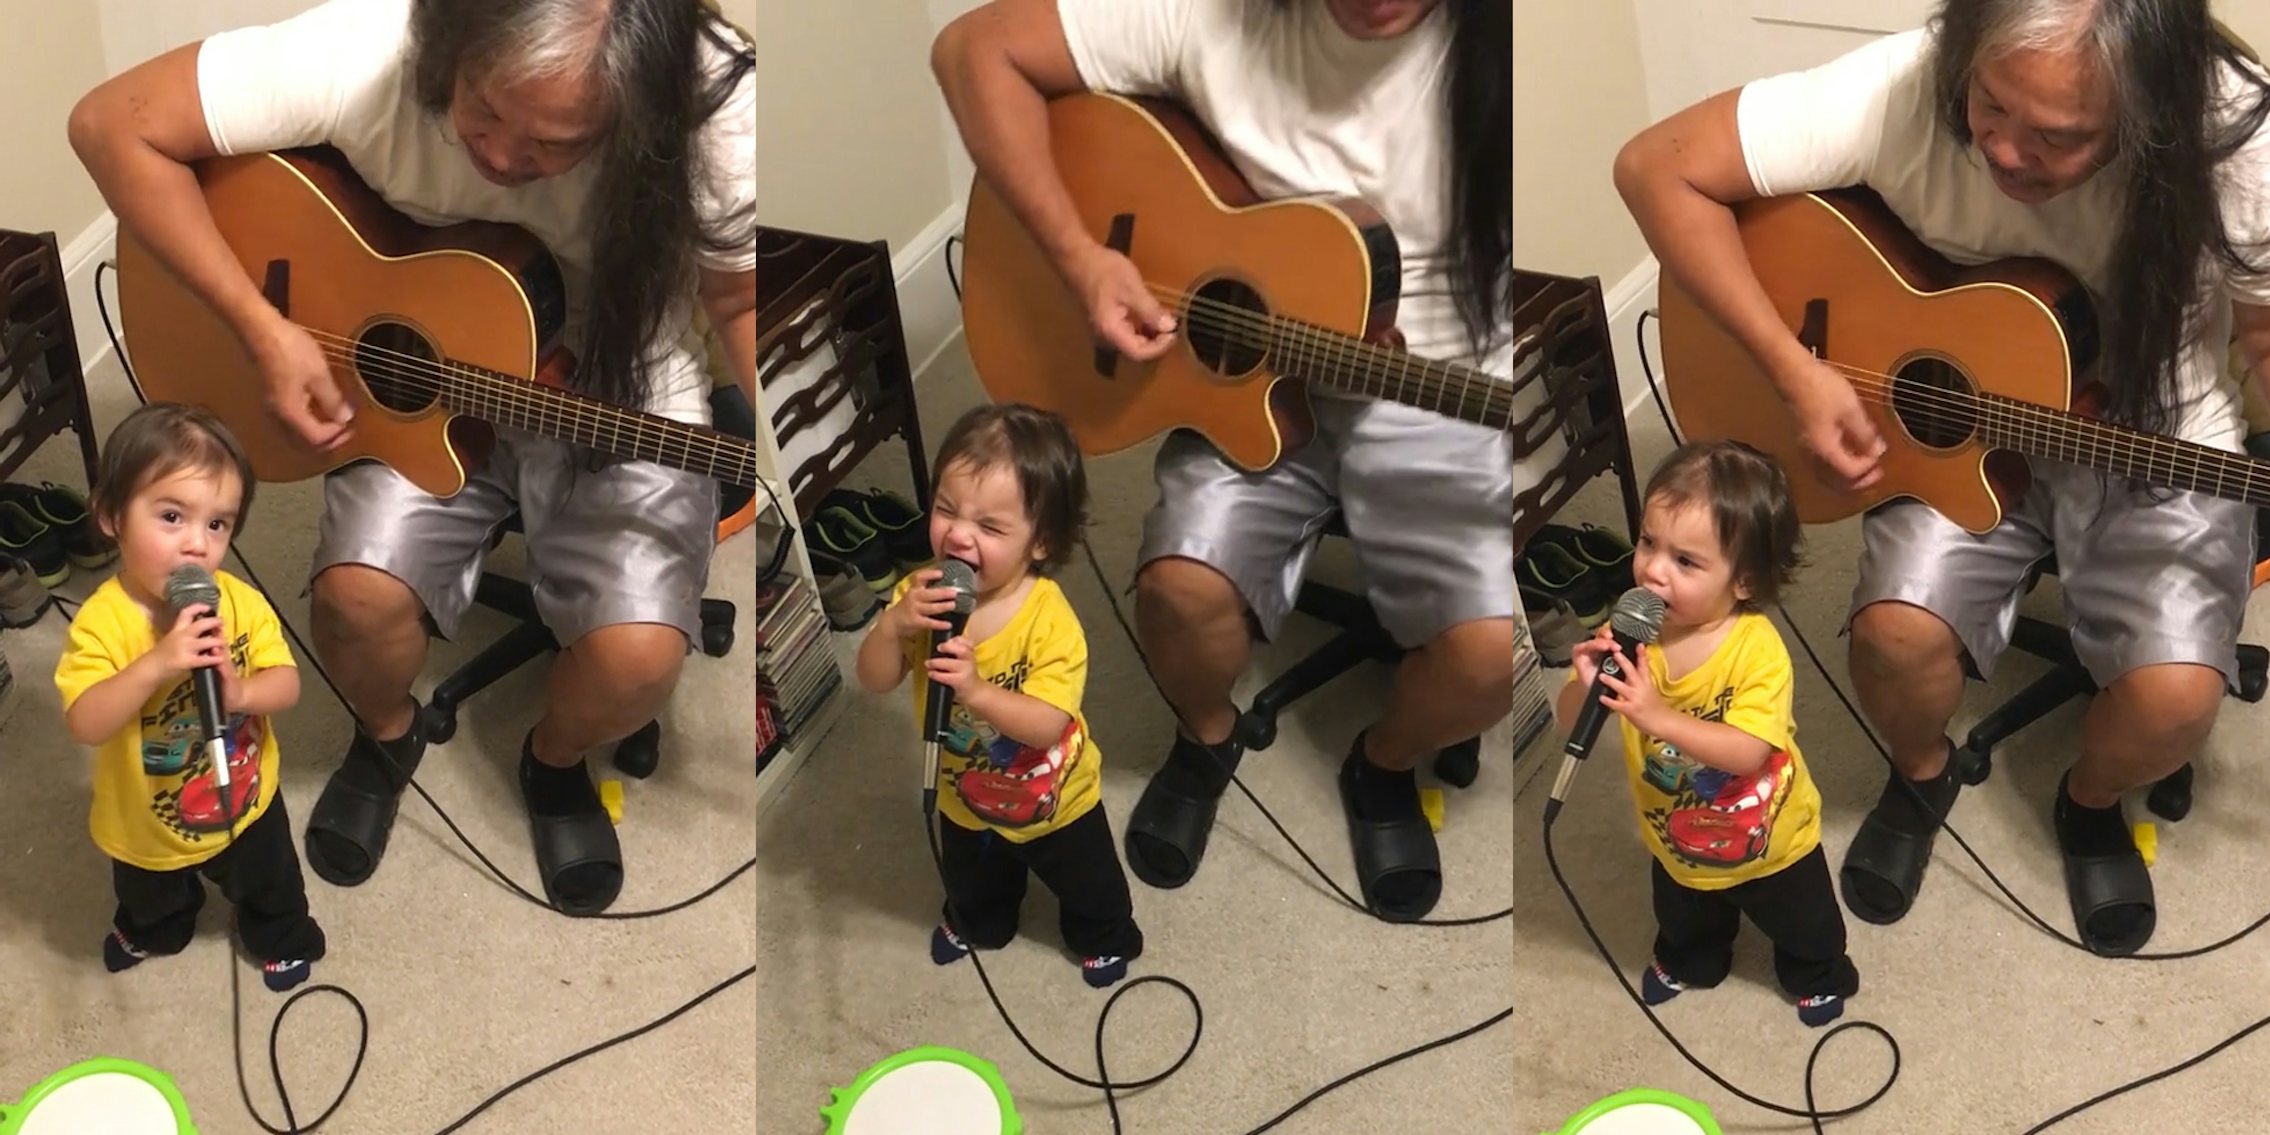 toddler singing into microphone with man playing guitar sitting in chair behind (l) toddler singing into microphone with man playing guitar sitting in chair behind (c) toddler singing into microphone with man playing guitar sitting in chair behind (r)